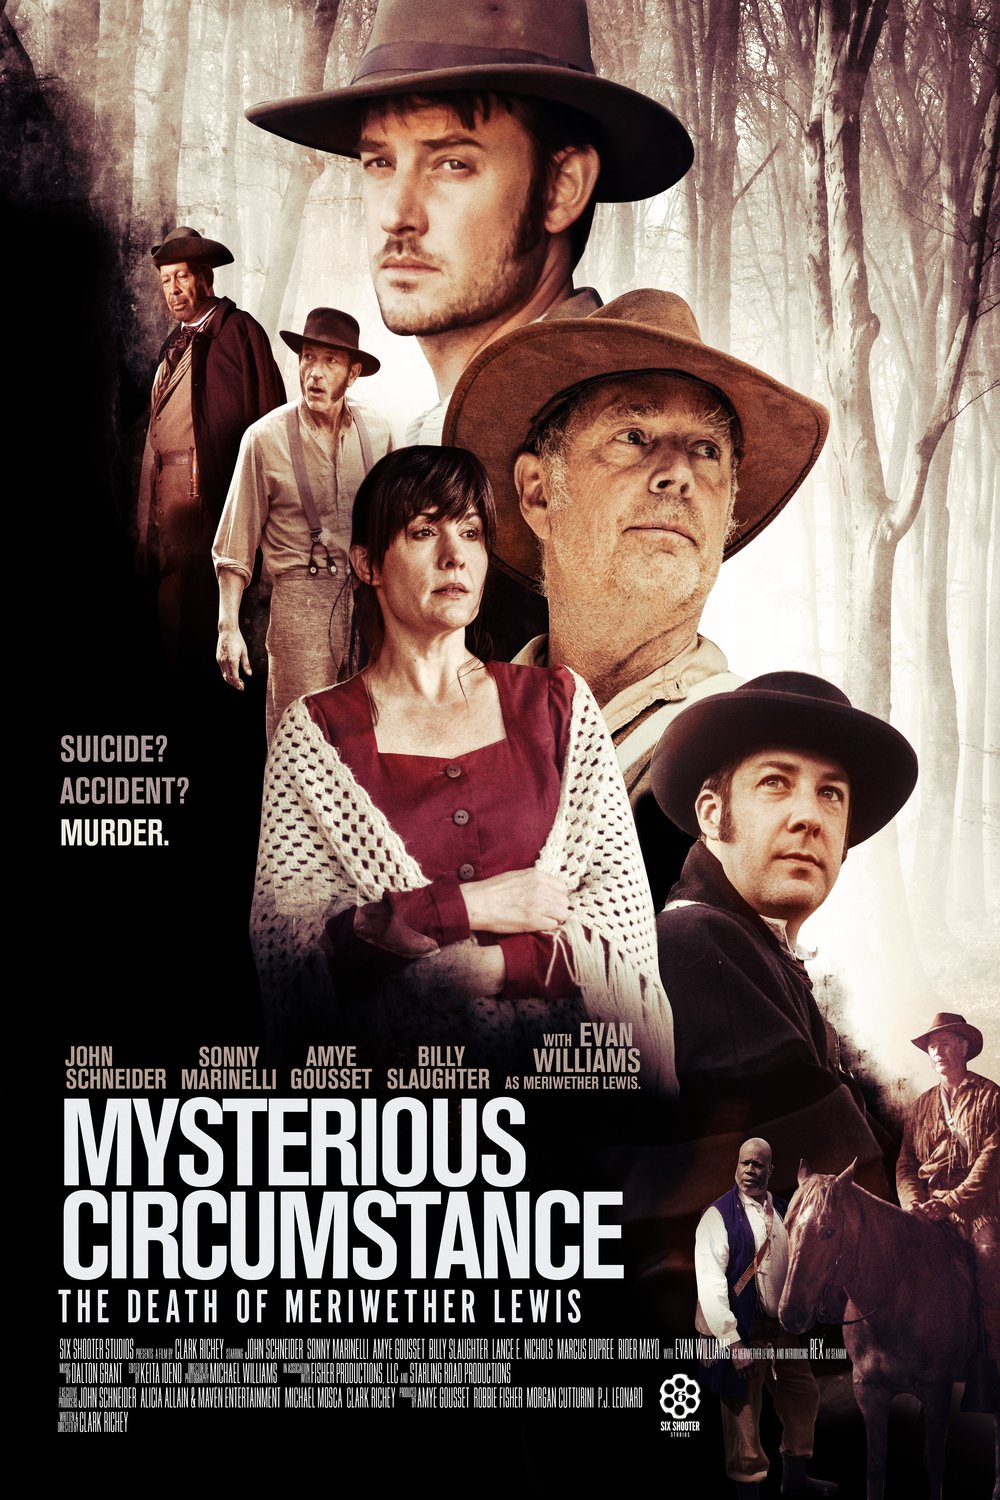 L'affiche du film Mysterious Circumstance: The Death of Meriwether Lewis